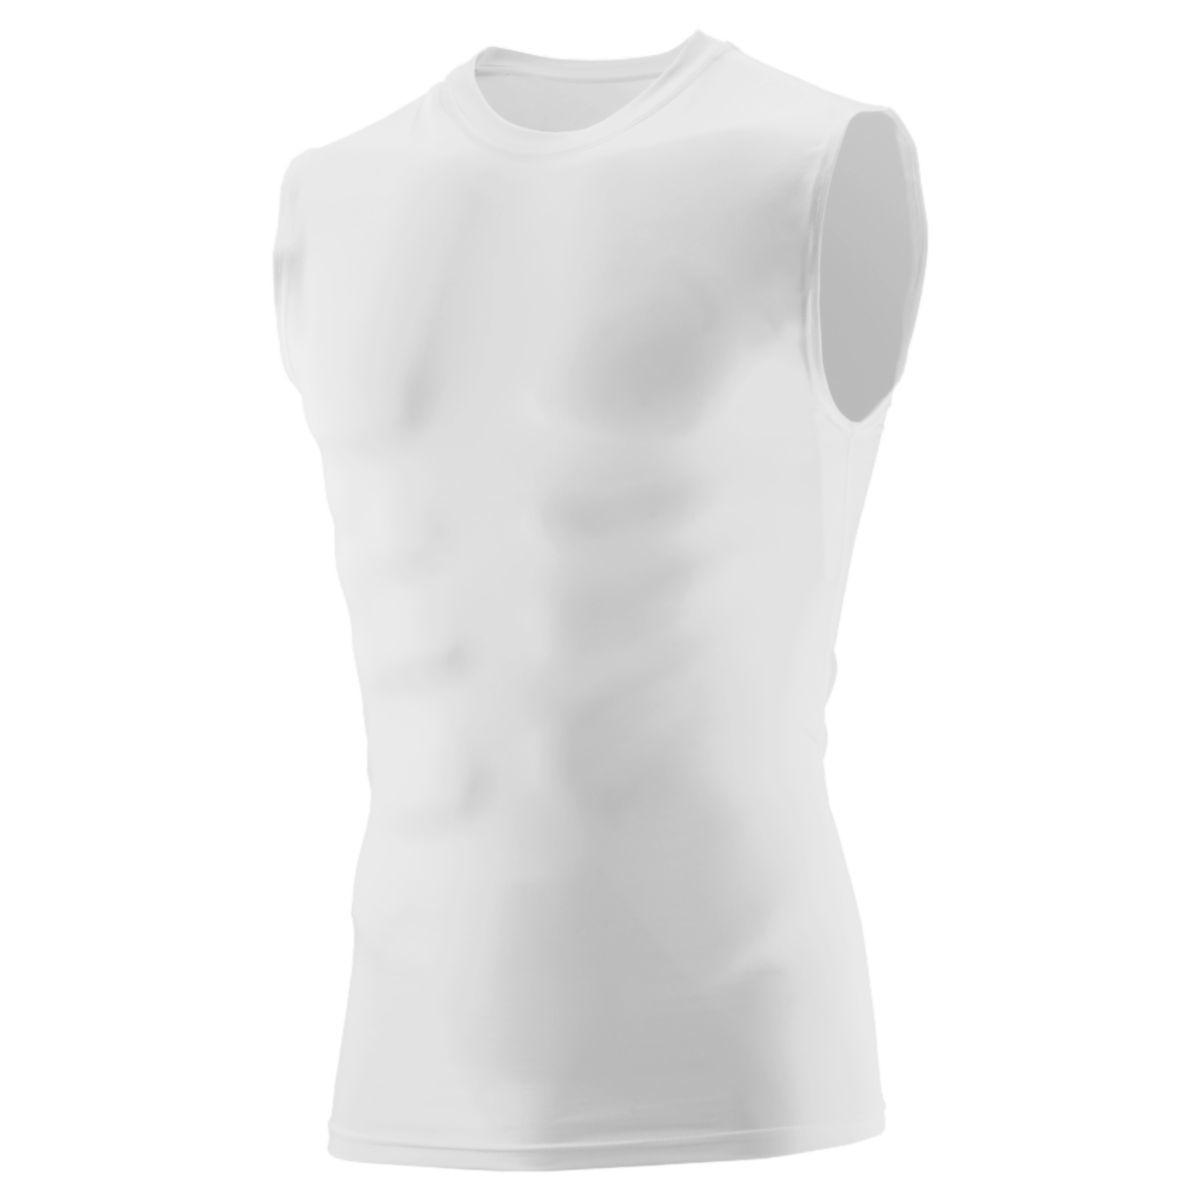 Augusta Sportswear Youth Hyperform Compression Sleeveless Tee in White  -Part of the Youth, Youth-Tee-Shirt, T-Shirts, Augusta-Products, Shirts product lines at KanaleyCreations.com